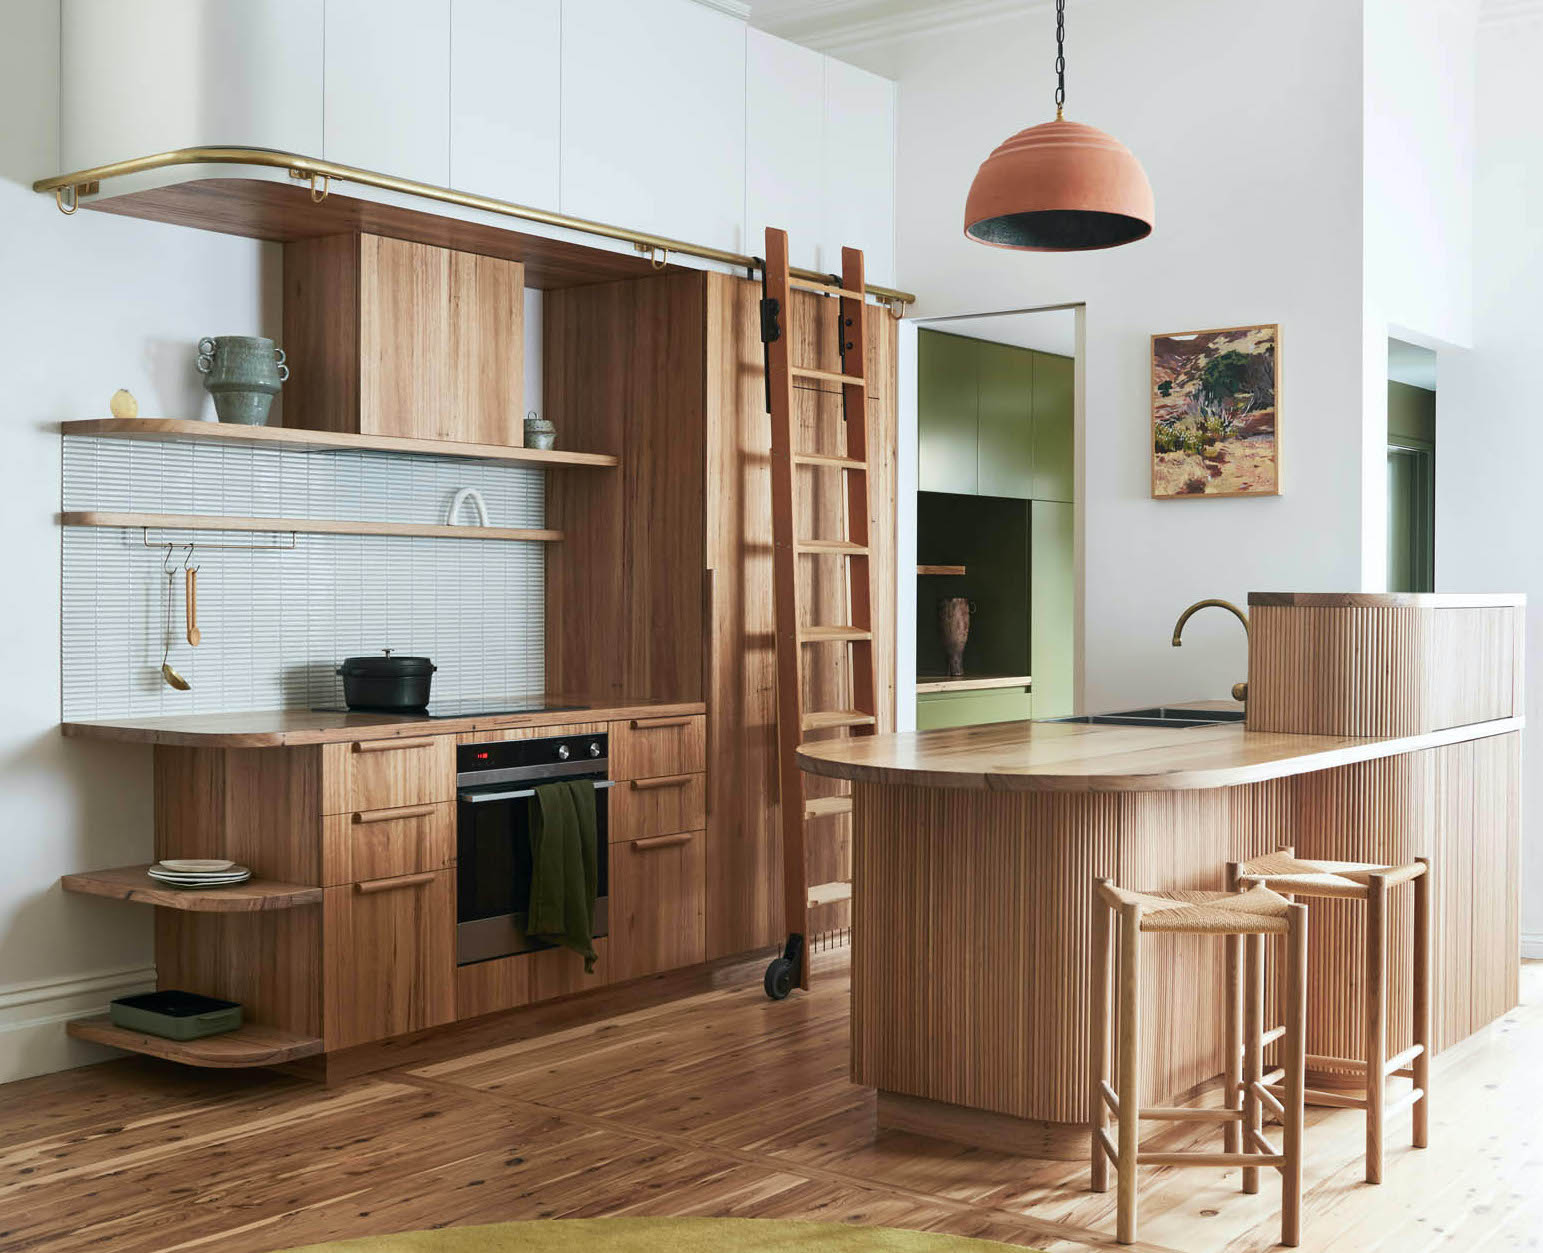 The Bent Street Project's Wood-Crafted Contemporary Kitchen by Kim Kneipp